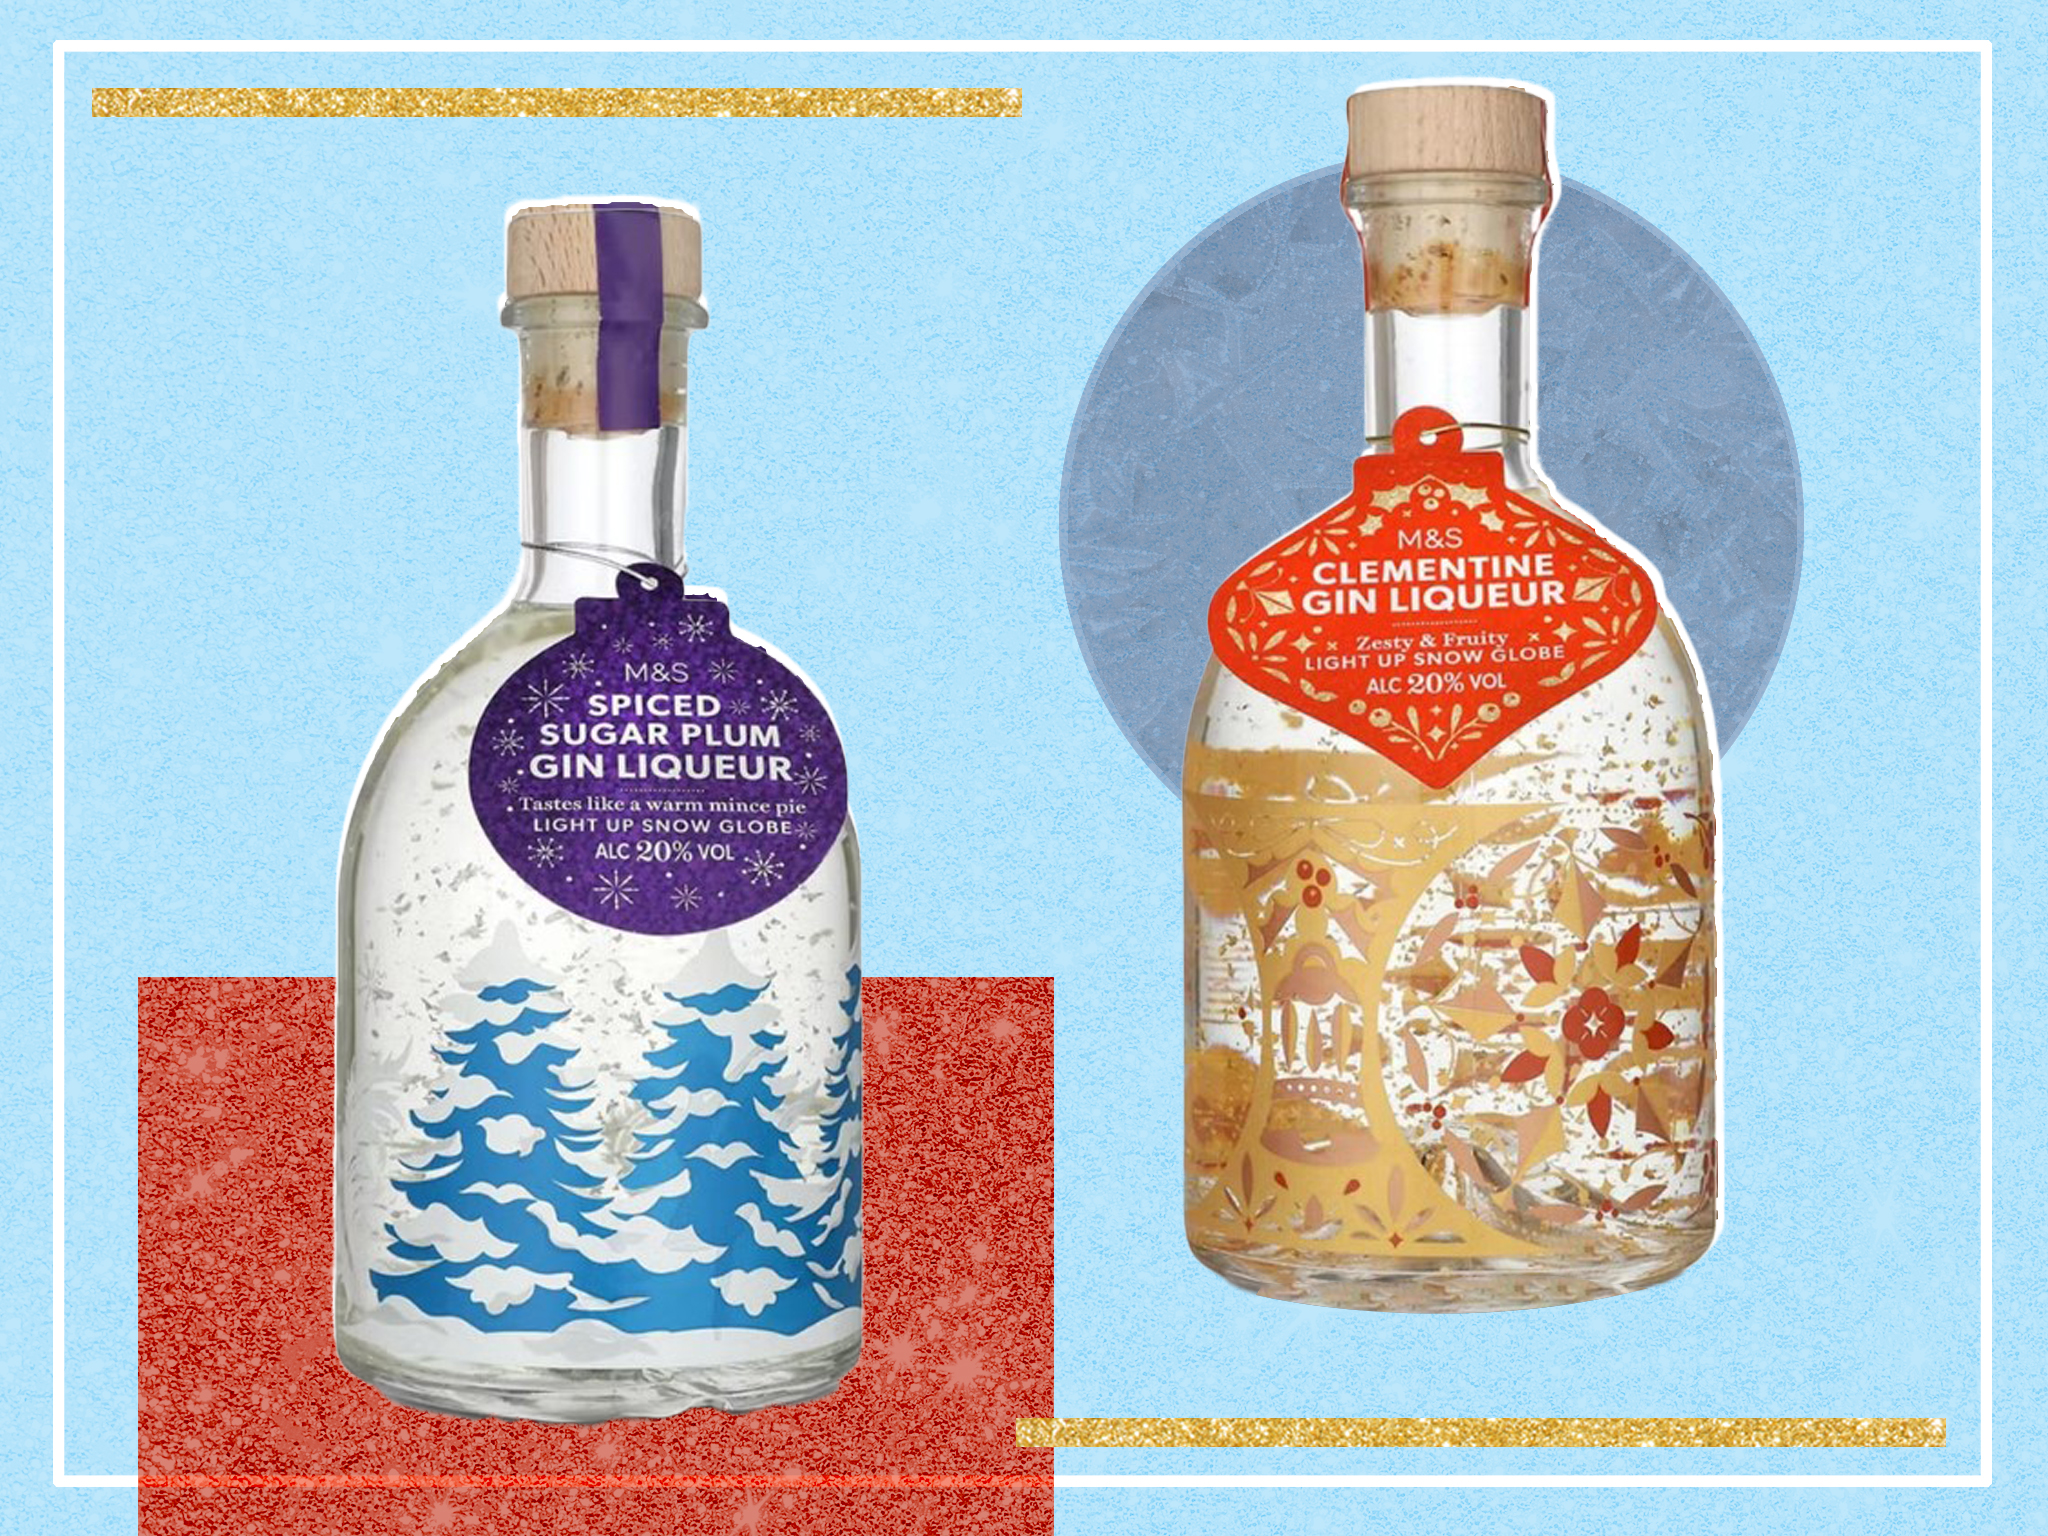 M&S’s light-up snow globe gin liqueur duo is now only £20 for two bottles, to get you in the Christmas spirit